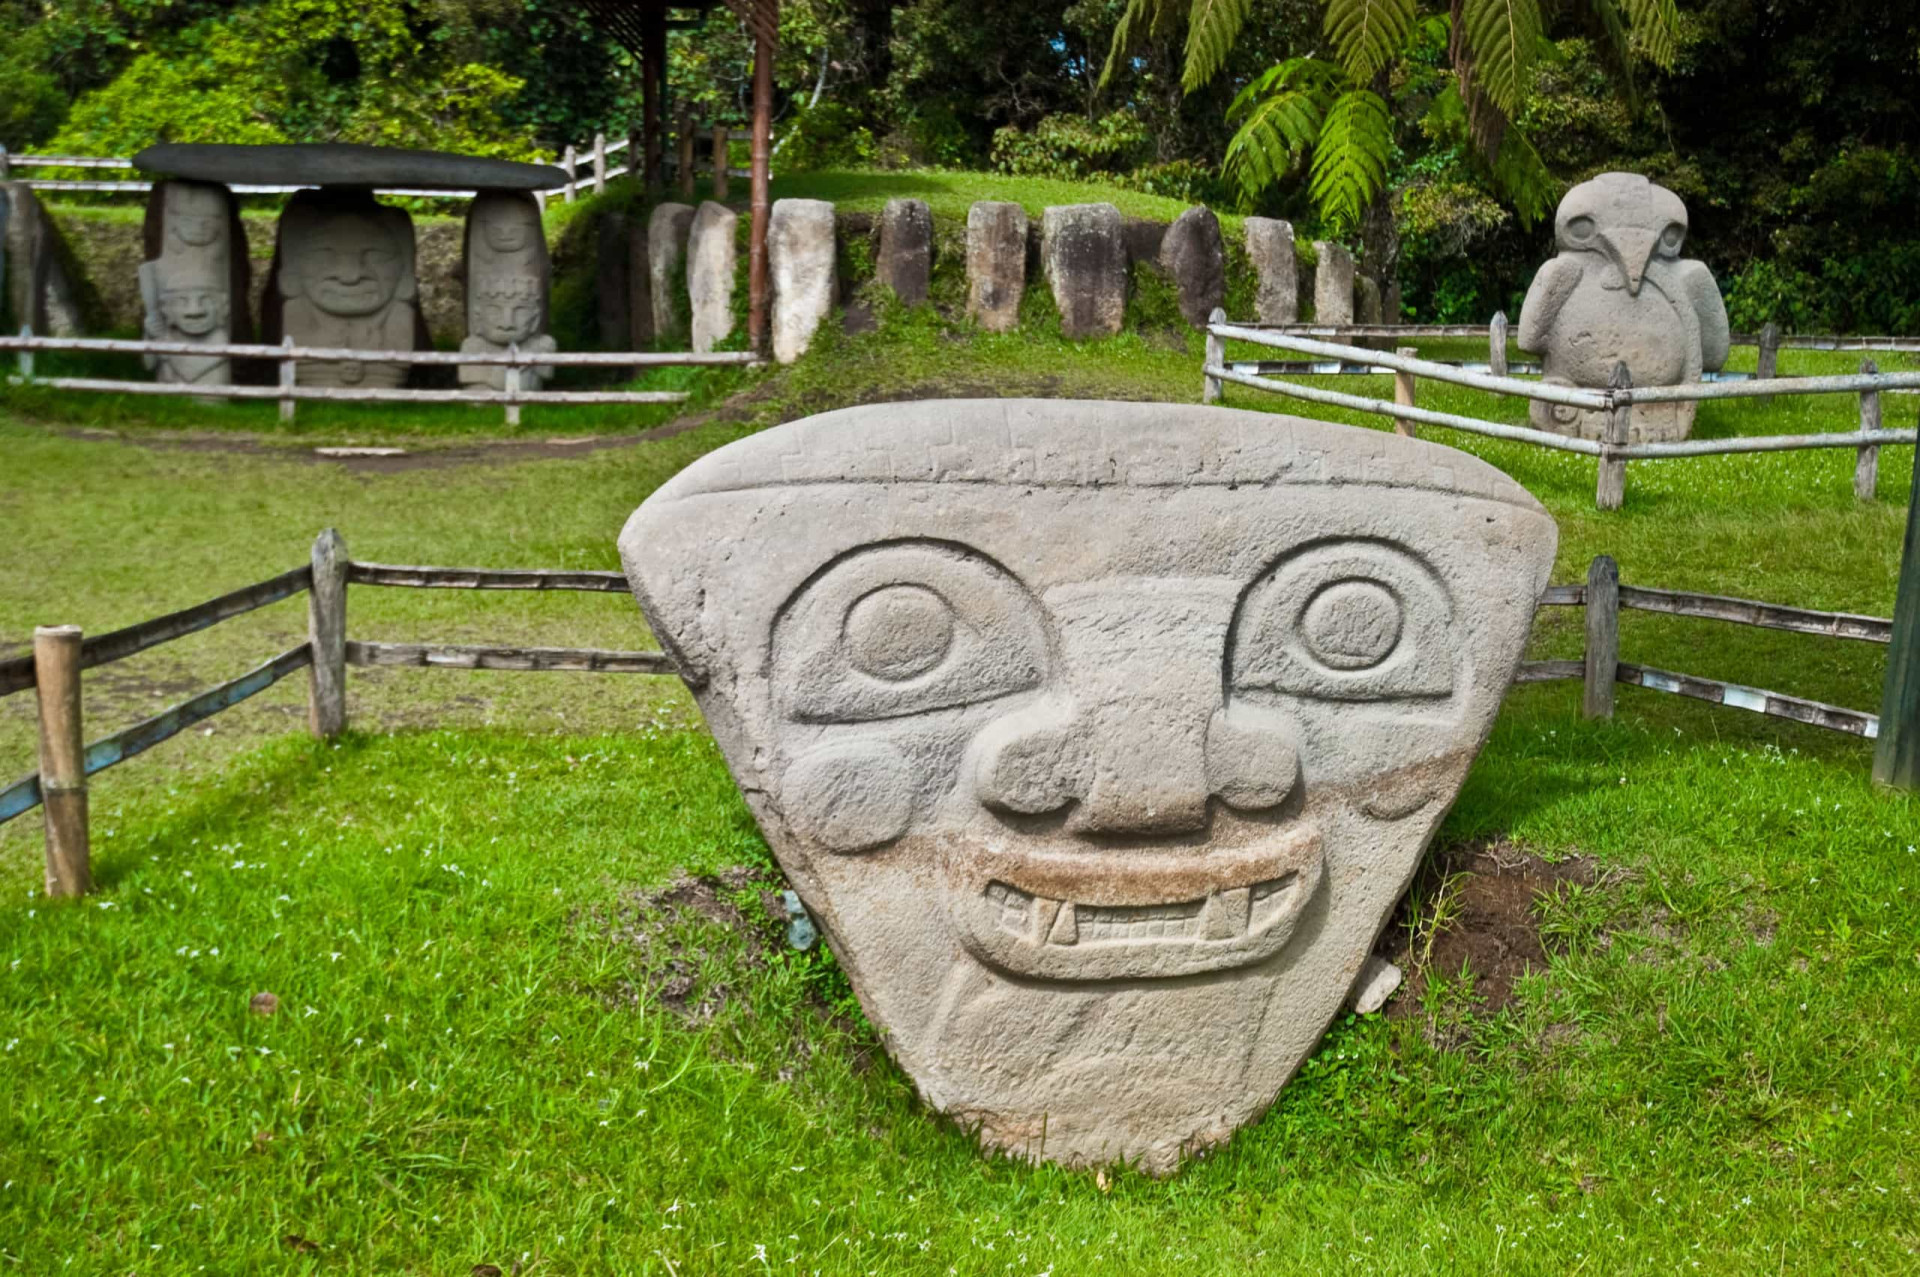 Location: Huila Department<br>Criteria: Cultural<br>Year established: 1995<br>Description: The park showcases the largest collection of religious monuments and megalithic sculptures in Latin America.<p><a href="https://www.msn.com/en-us/community/channel/vid-7xx8mnucu55yw63we9va2gwr7uihbxwc68fxqp25x6tg4ftibpra?cvid=94631541bc0f4f89bfd59158d696ad7e">Follow us and access great exclusive content every day</a></p>